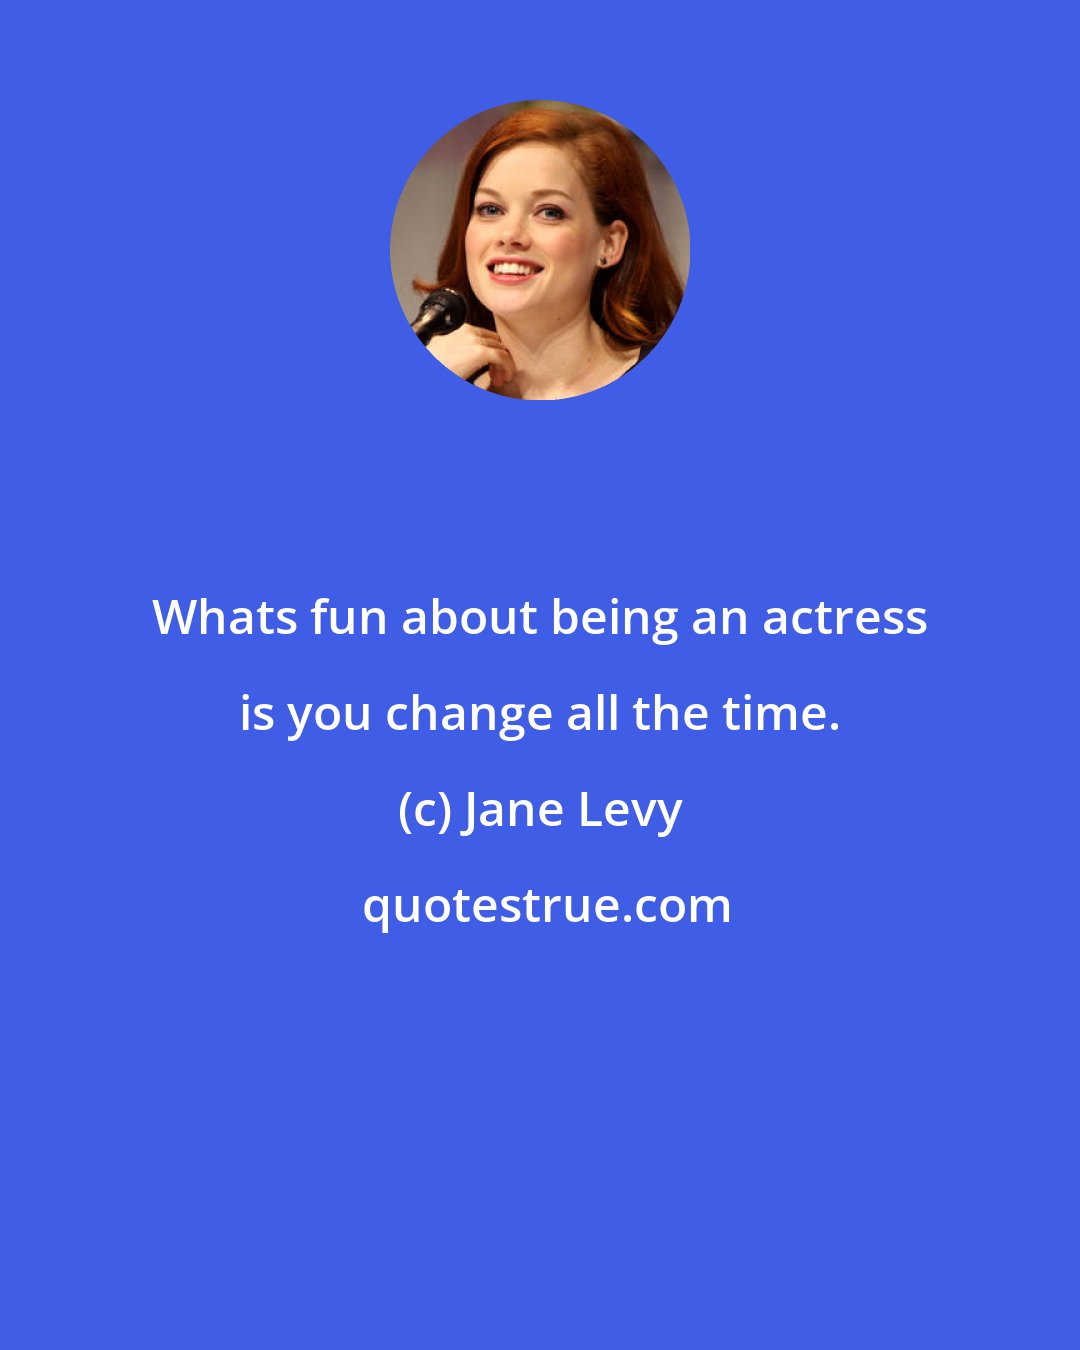 Jane Levy: Whats fun about being an actress is you change all the time.